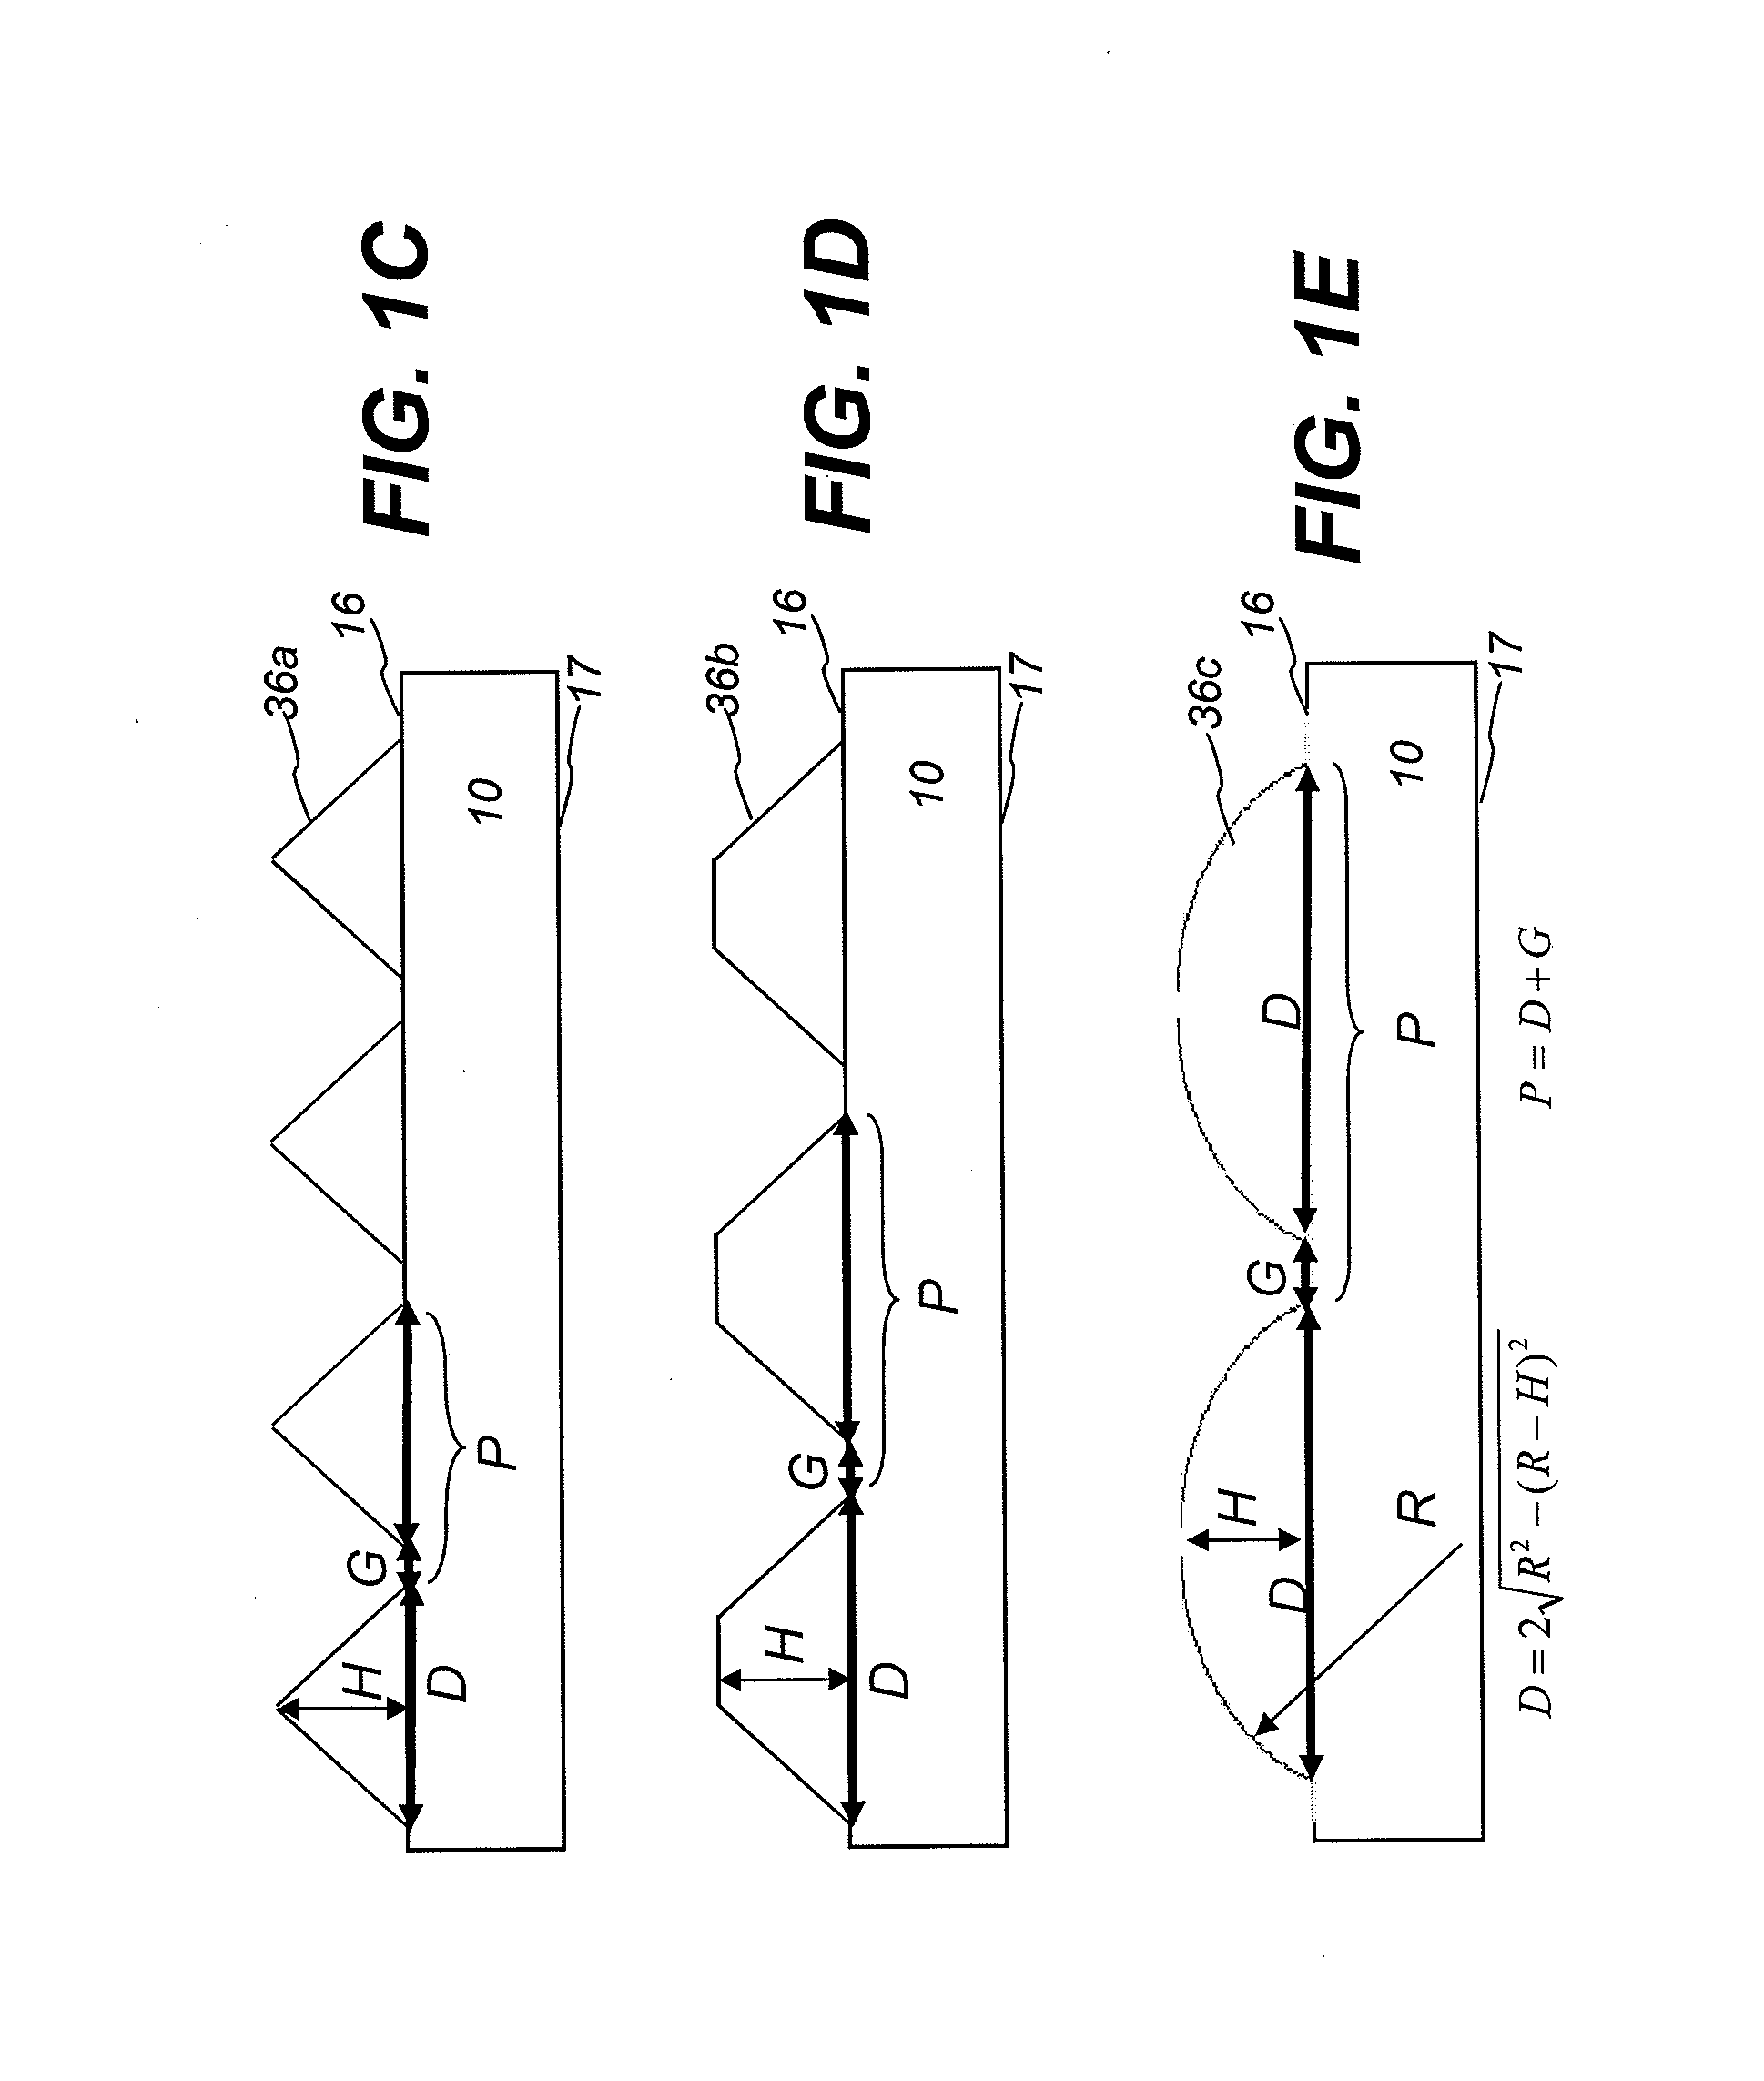 Method for reducing hot spots in light guide plates